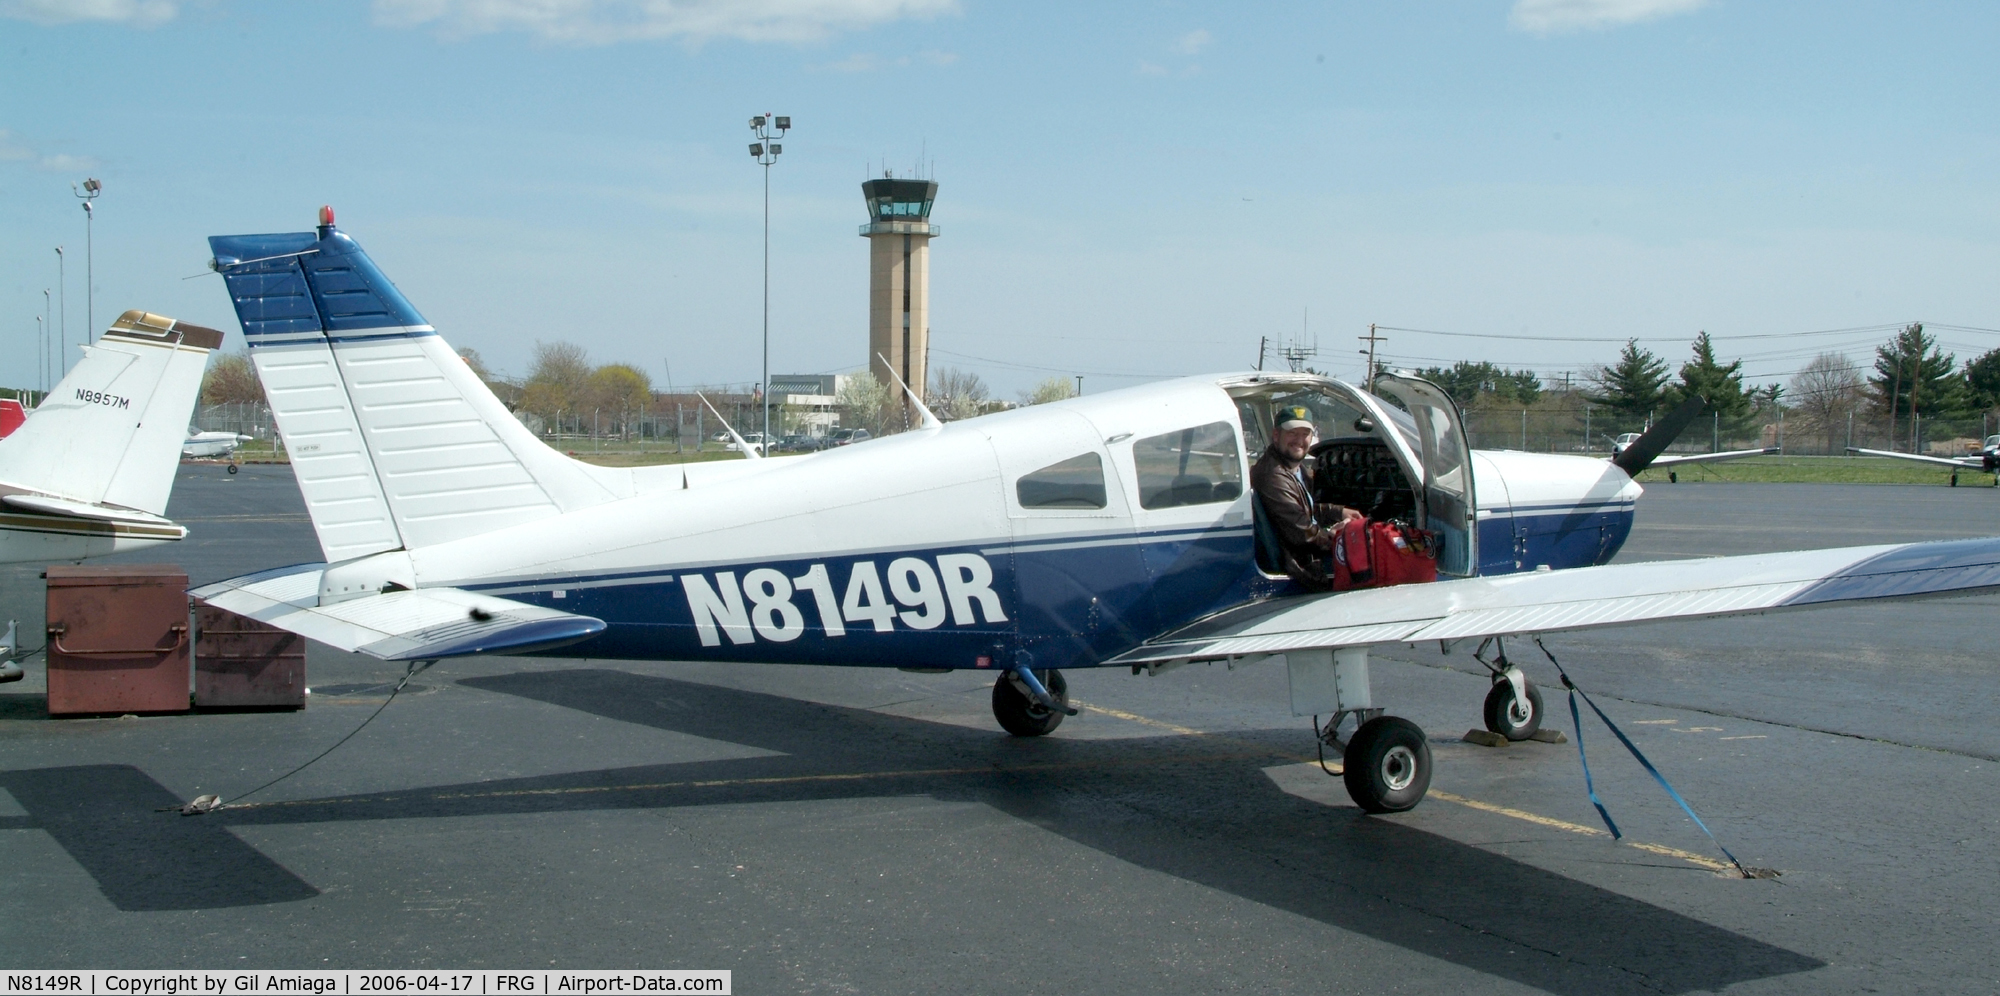 N8149R, 1980 Piper PA-28-161 C/N 28-8016254, Your humble correspondent in 49R.